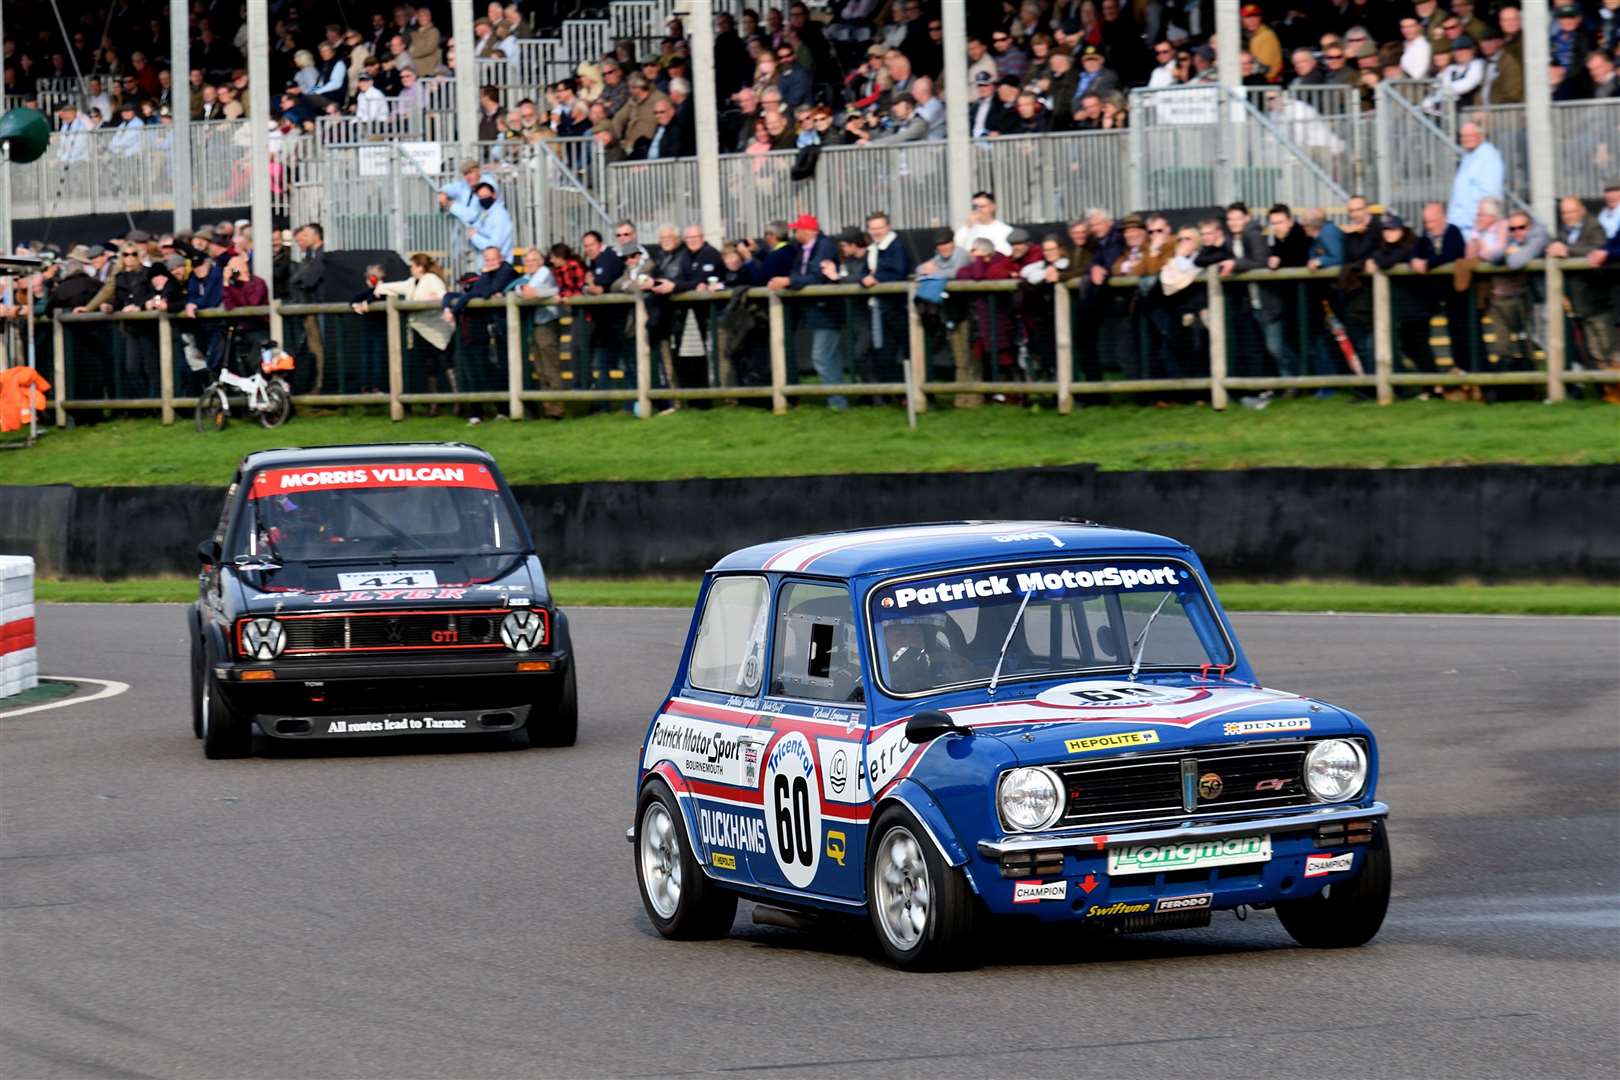 Nick Swift (60), from Tenterden, had to retire after two laps in the lead, in heat one of the Gerry Marshall Trophy race, in his Mini 1275 GT. Picture: Simon Hildrew (52524991)